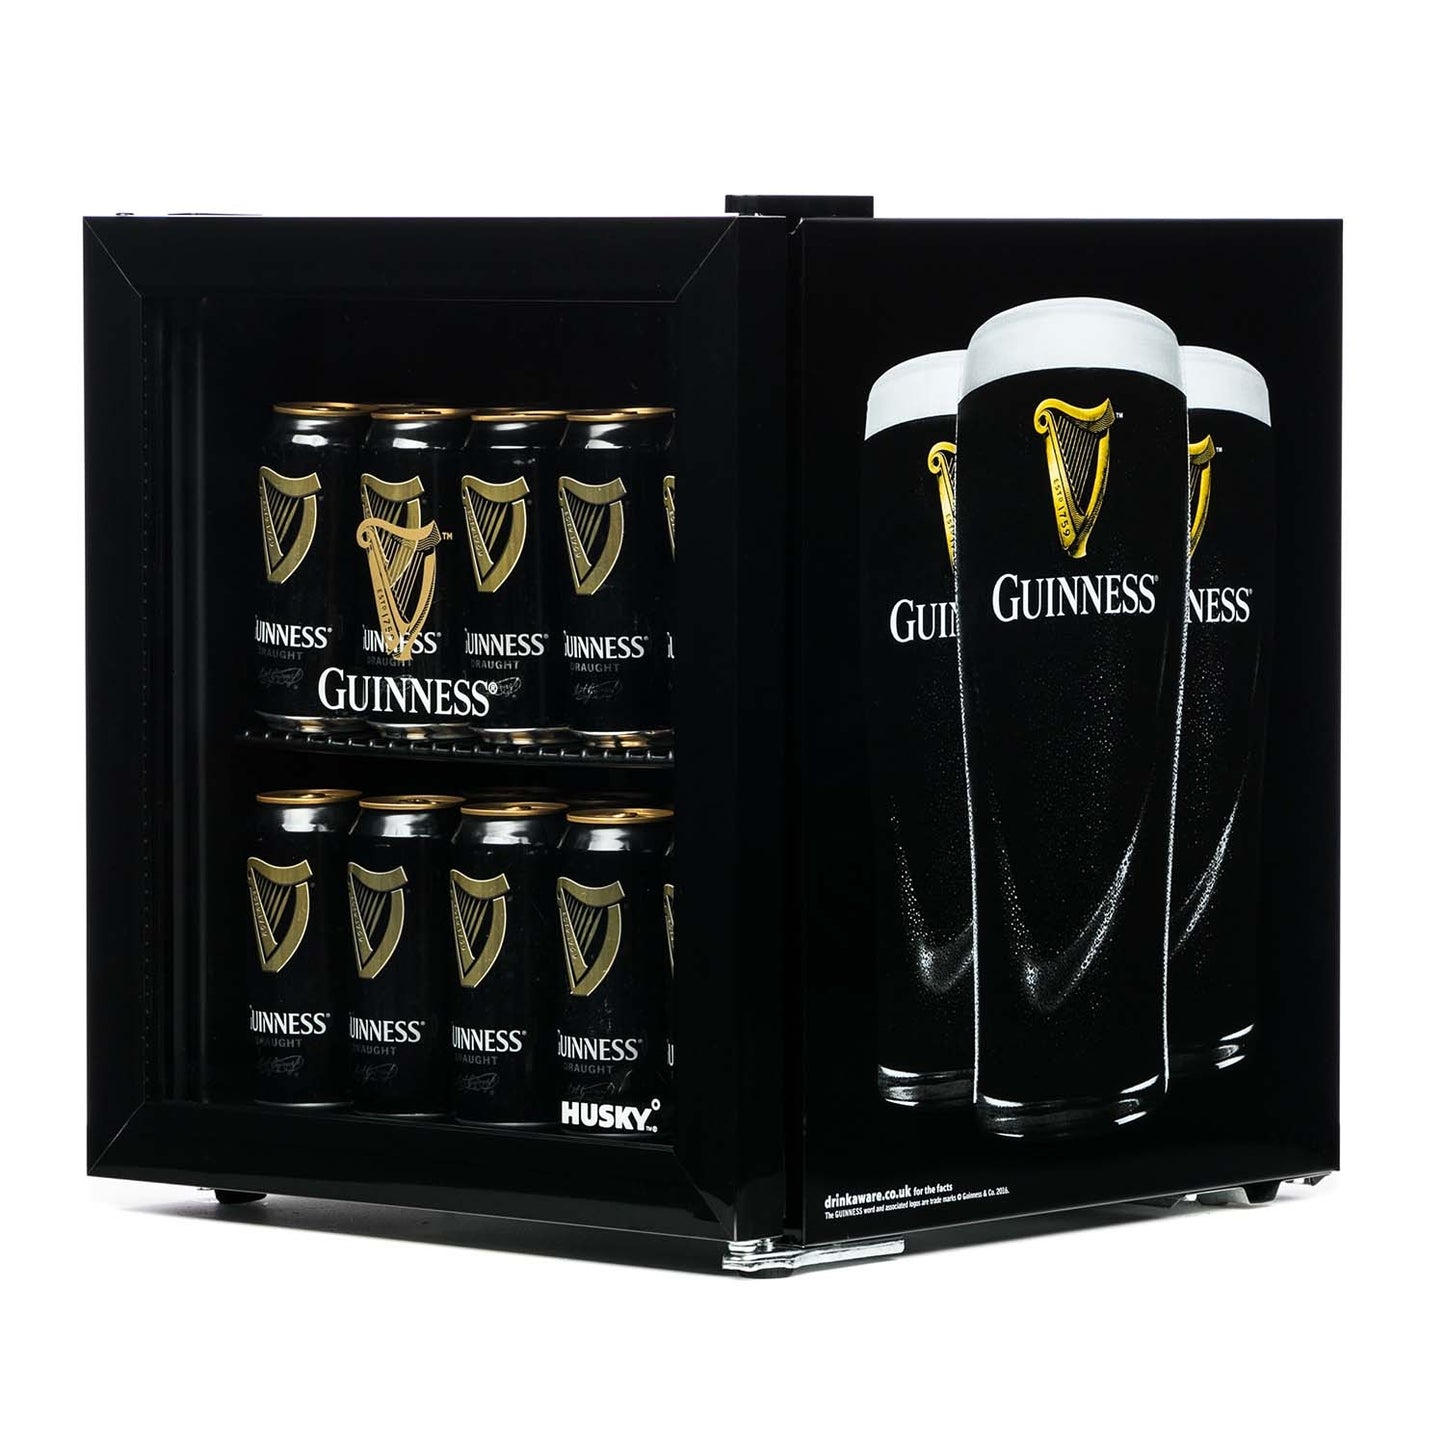 Guinness Guinness Fridge with six cans of iconic stout.